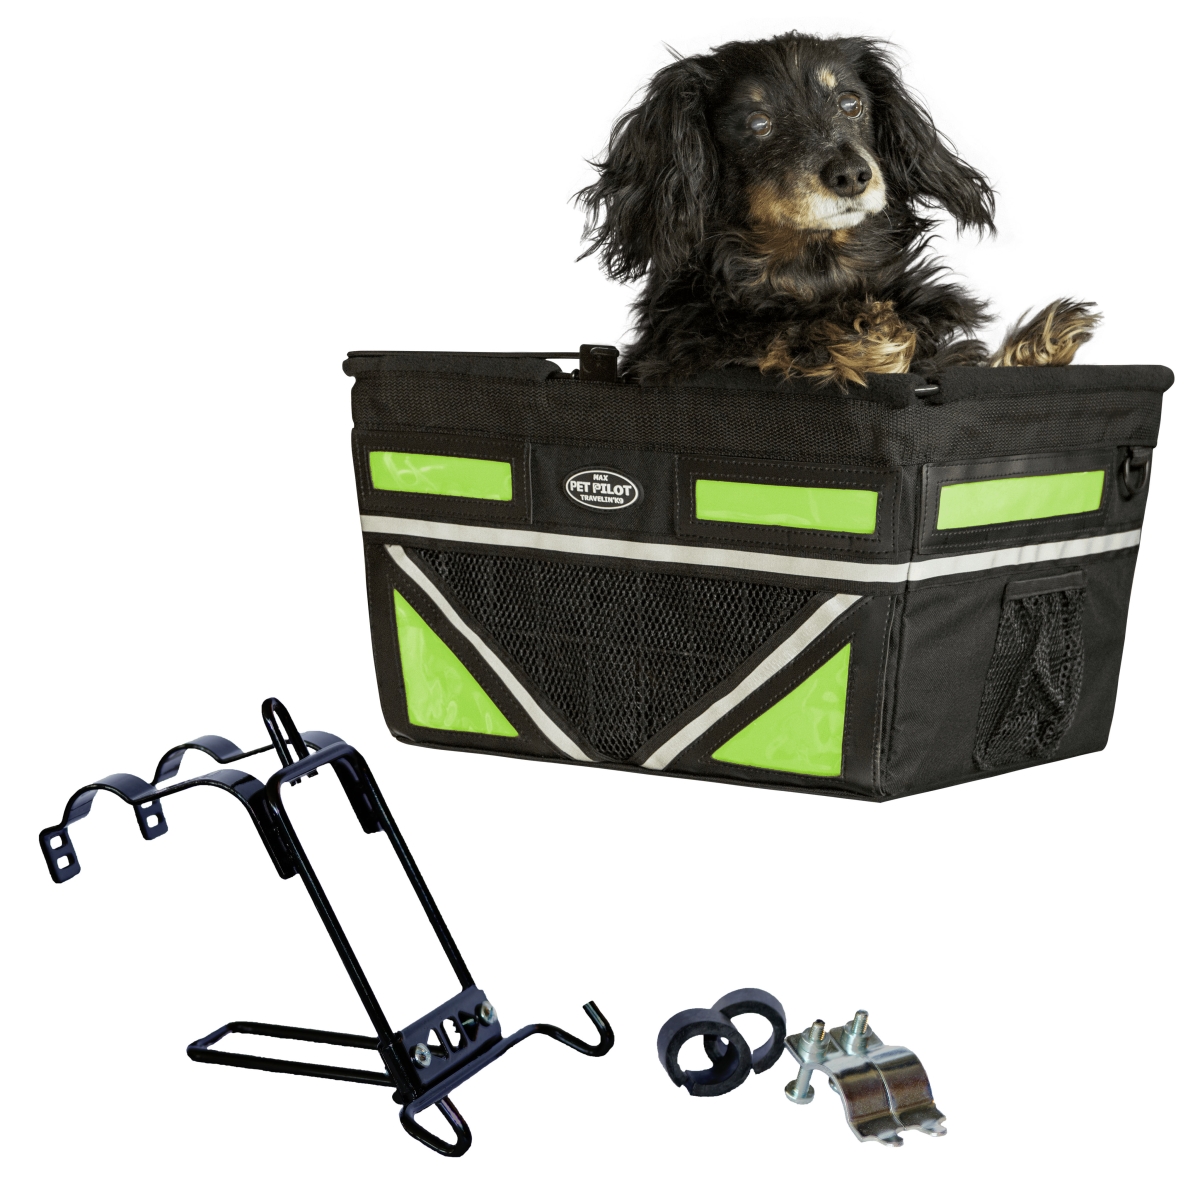 Ptx-8144 Max Dog Bicycle Basket Carrier, Neon Green